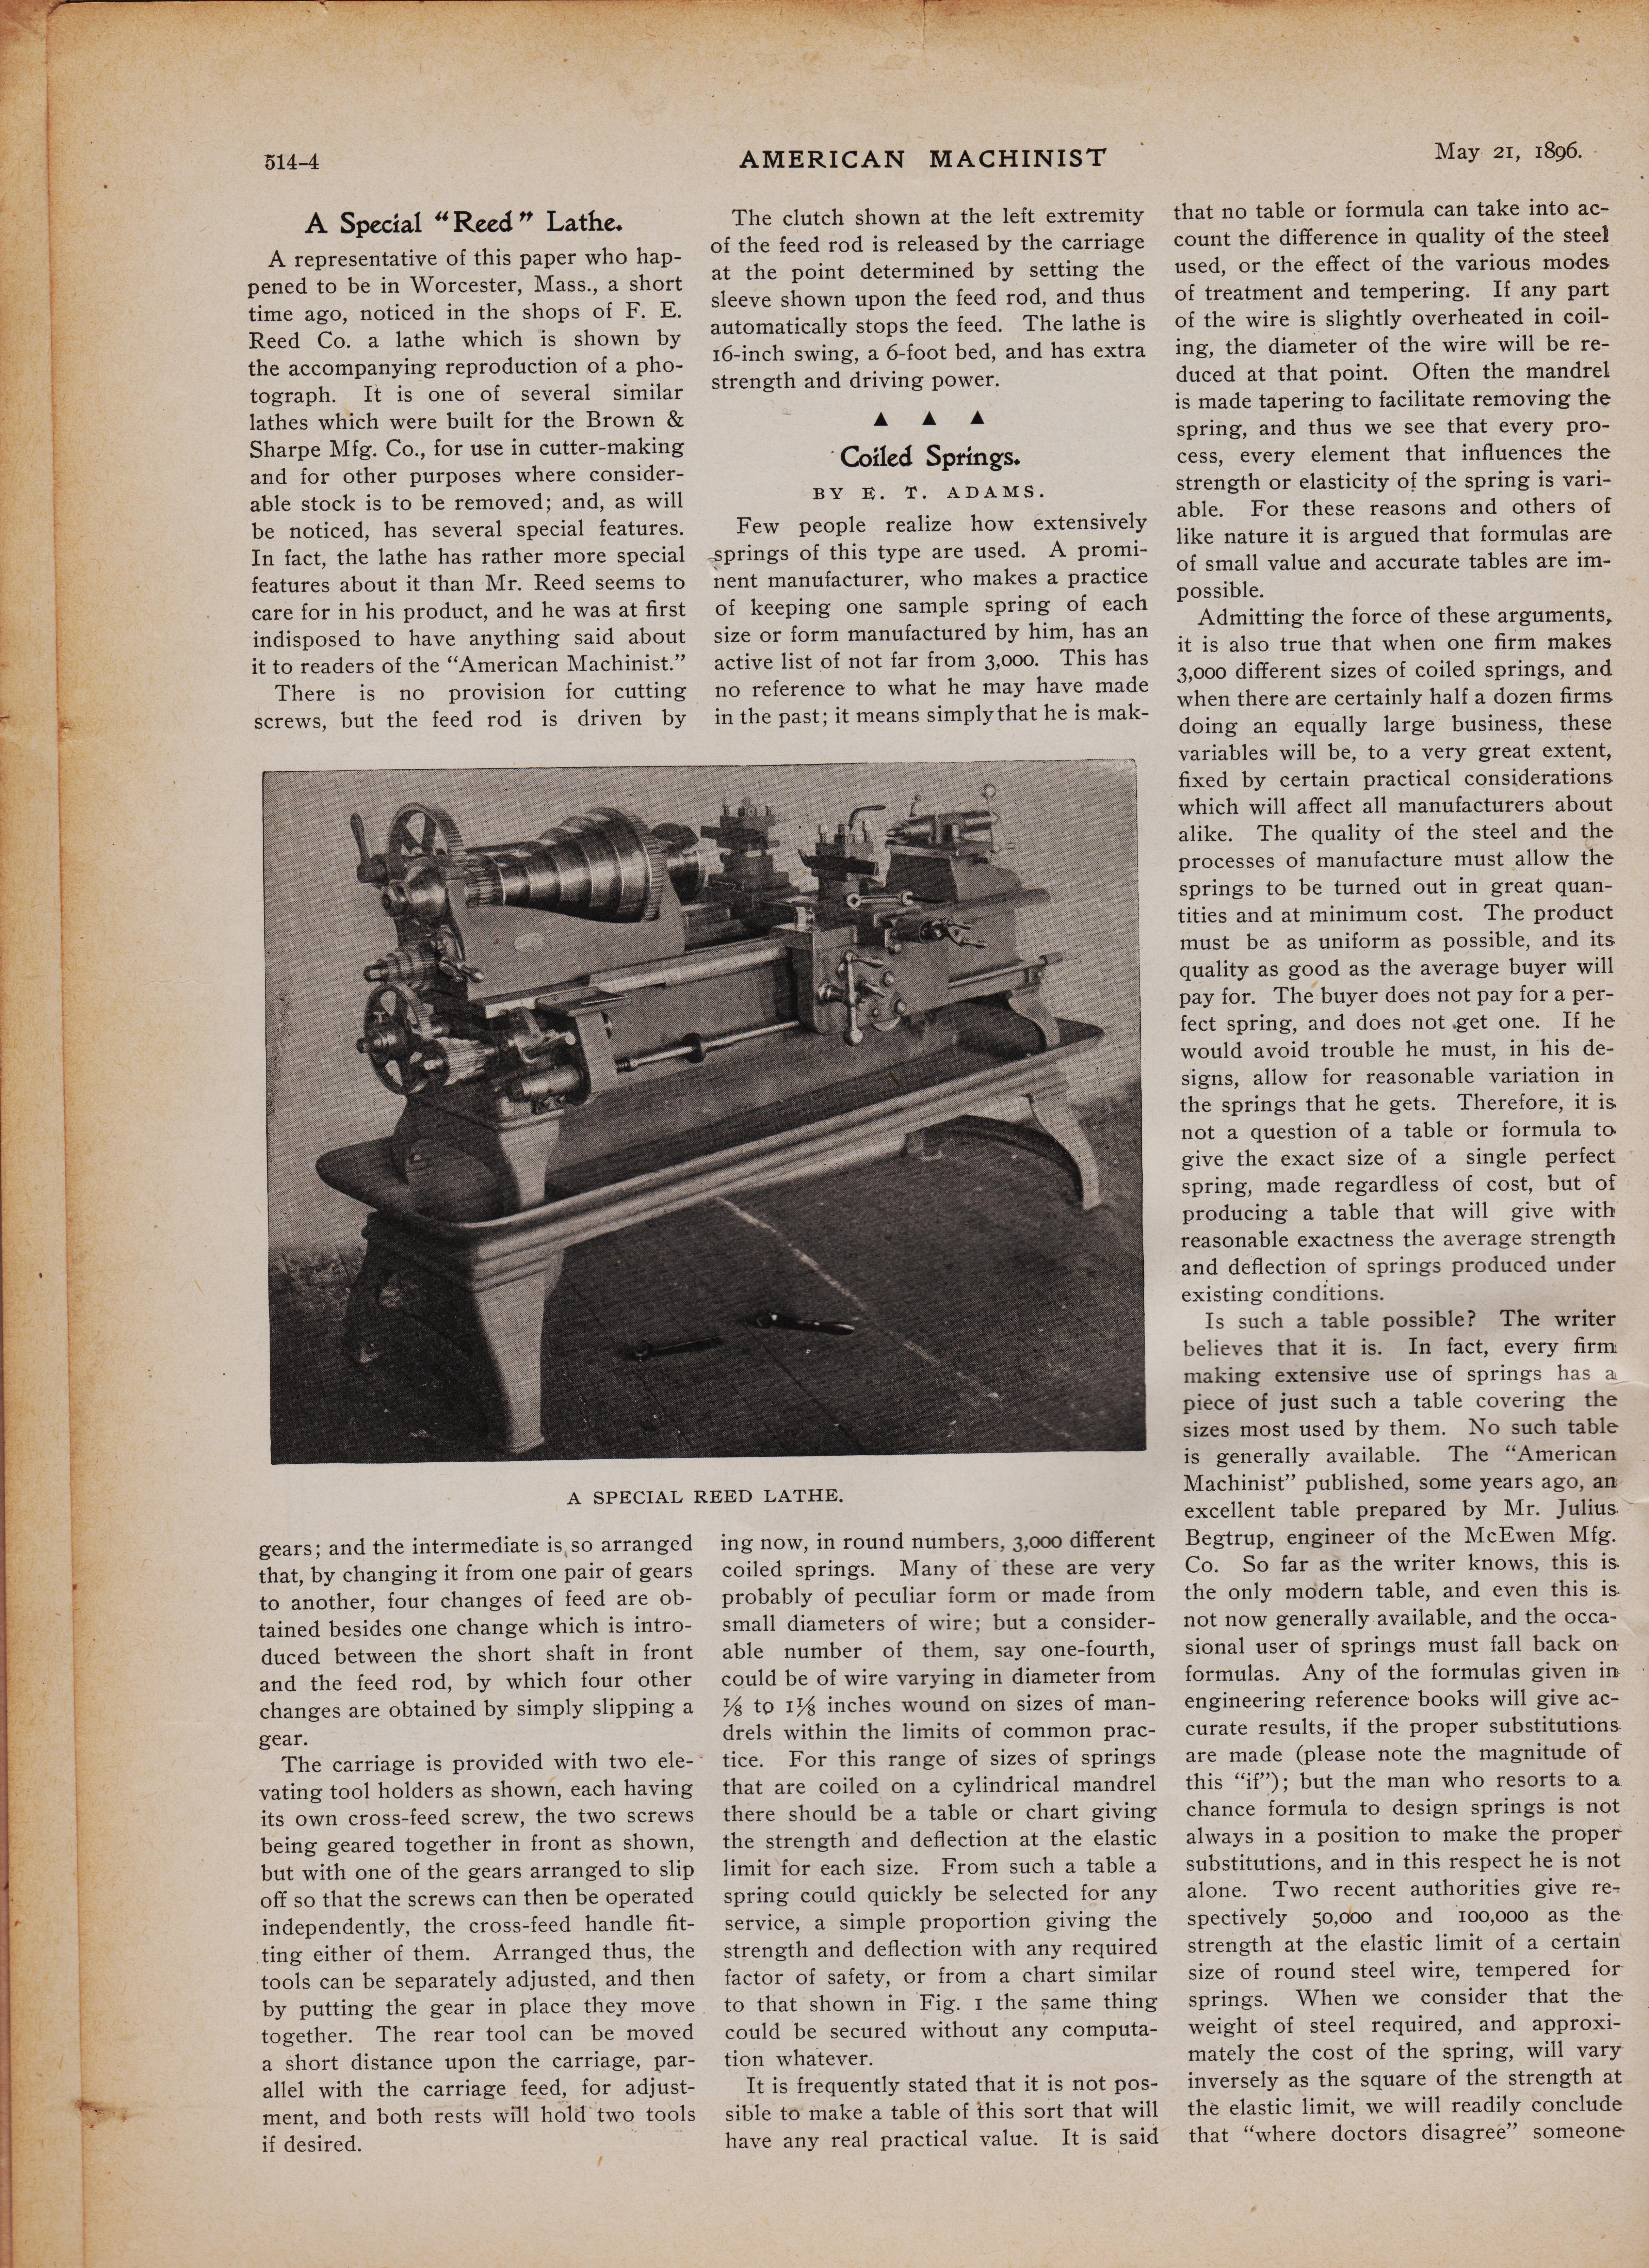 https://antiquemachinery.com/images-1896/American-Machinist-Feb-12-1887-May-1-pg-4-Special-Reed-Lathe.jpeg